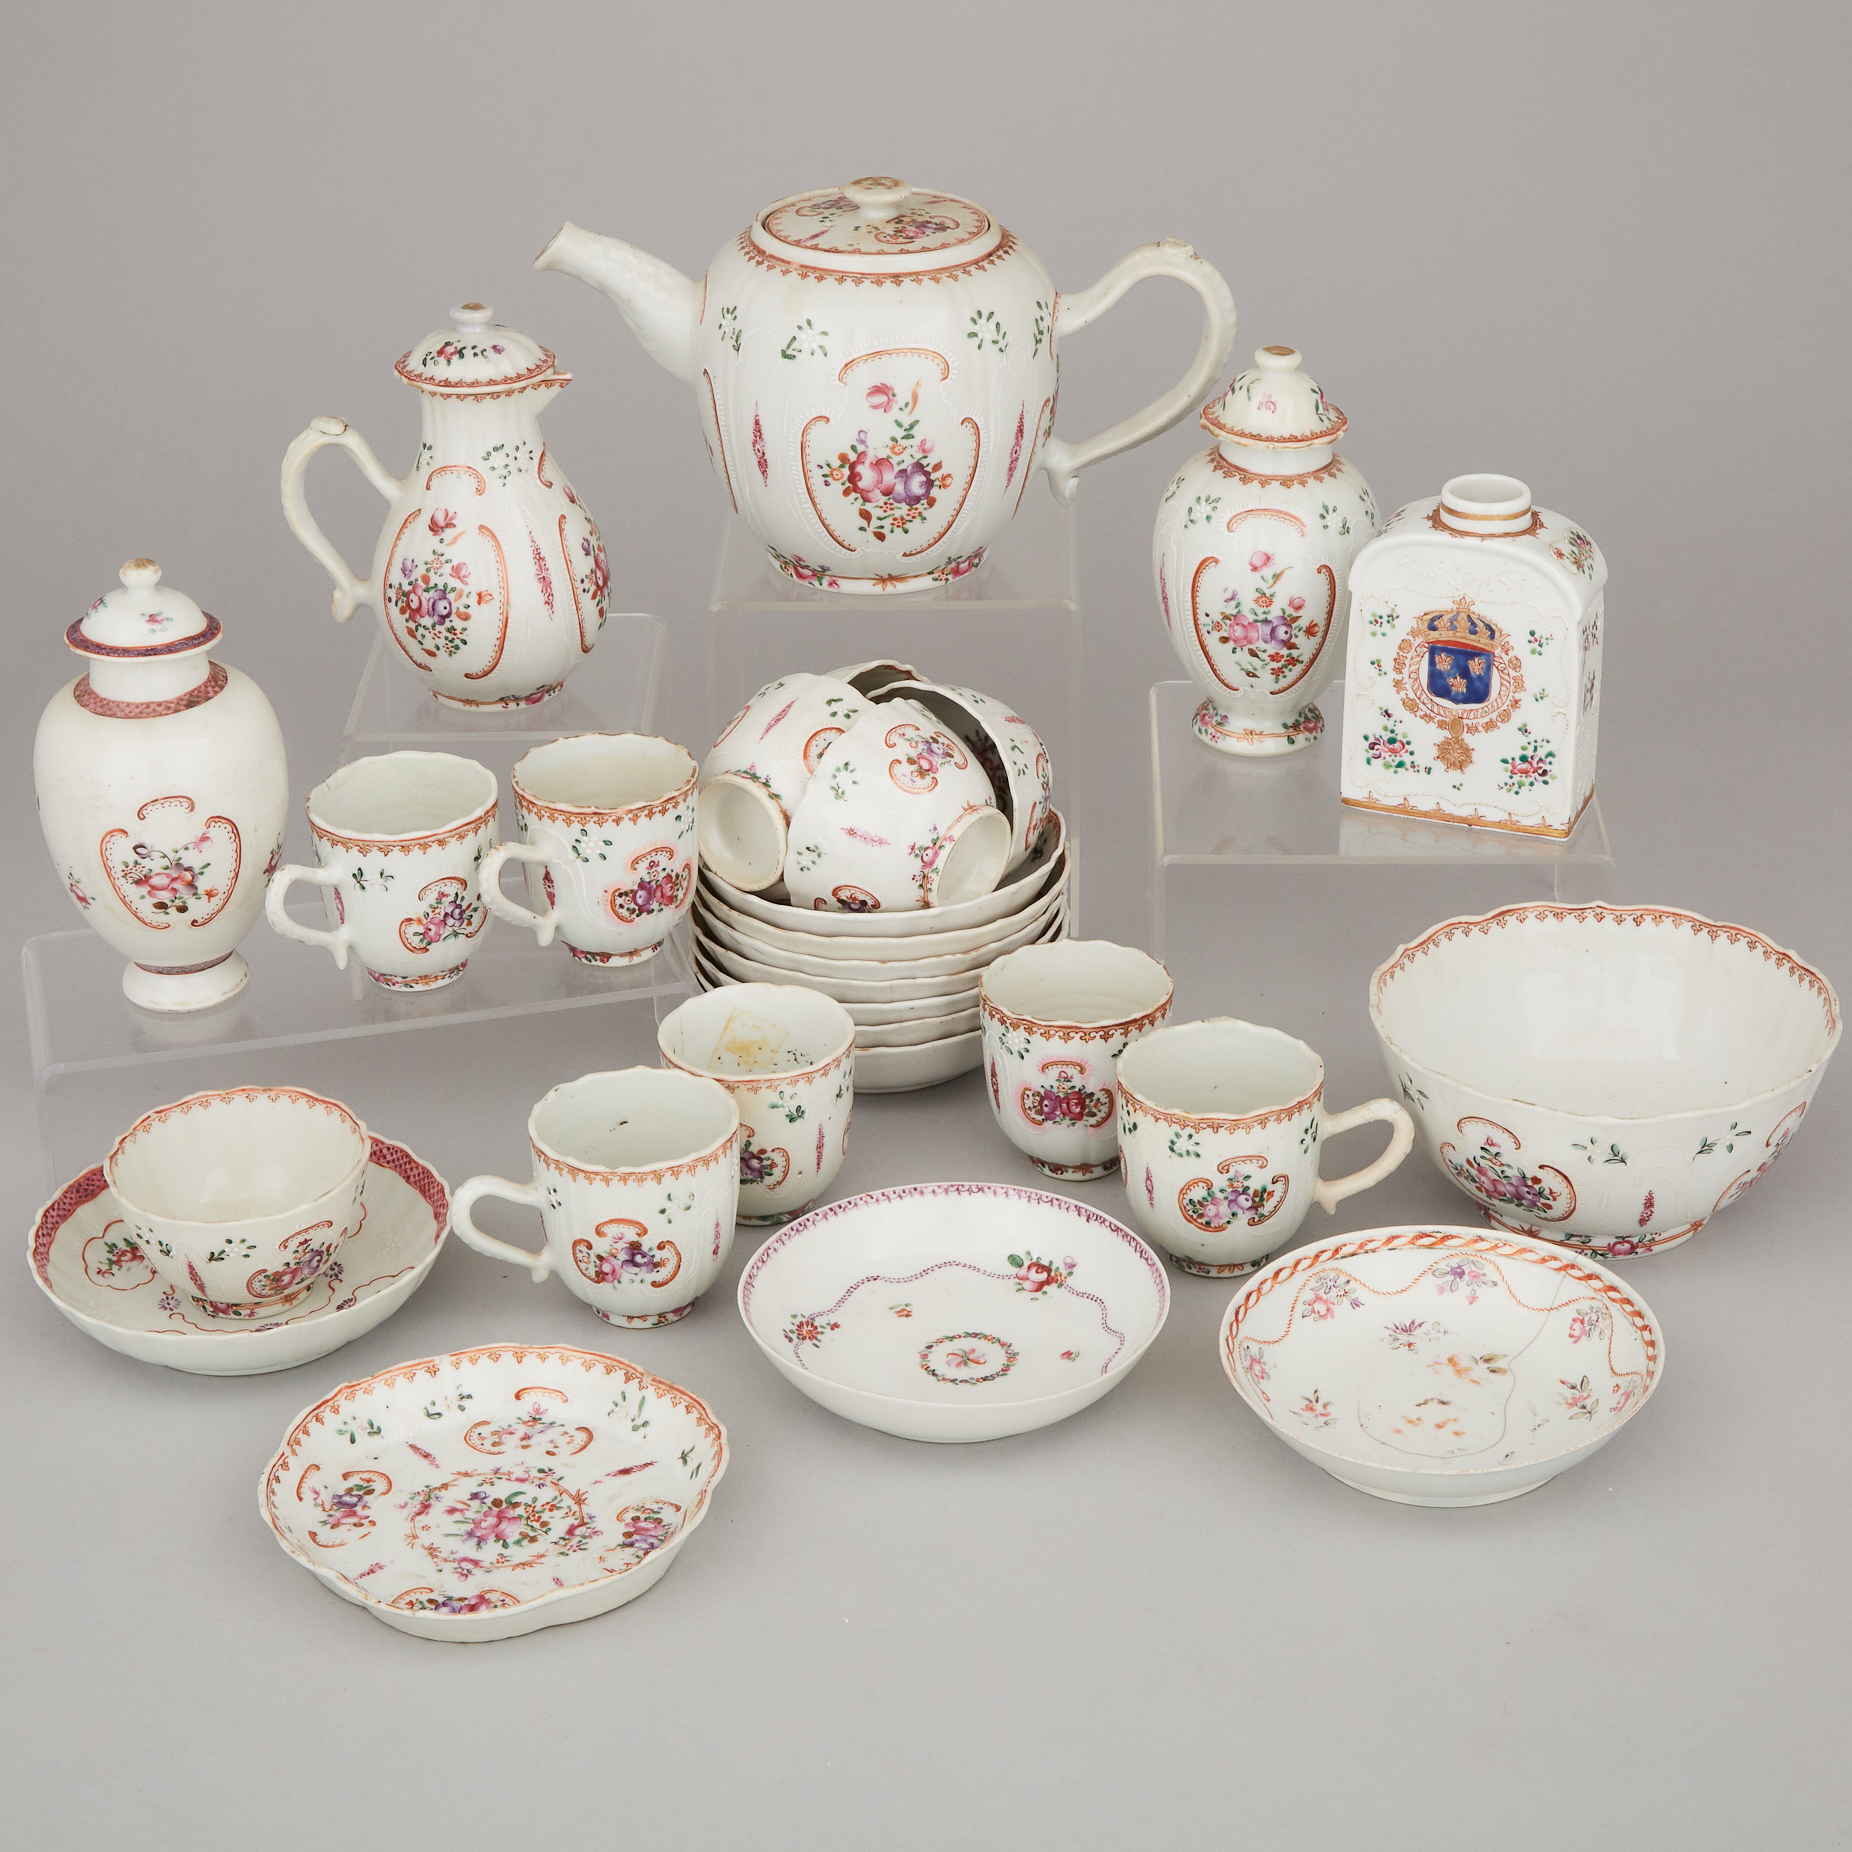 A Group of Twenty-Eight Chinese Export Famille Rose Porcelain Wares, 18th Century